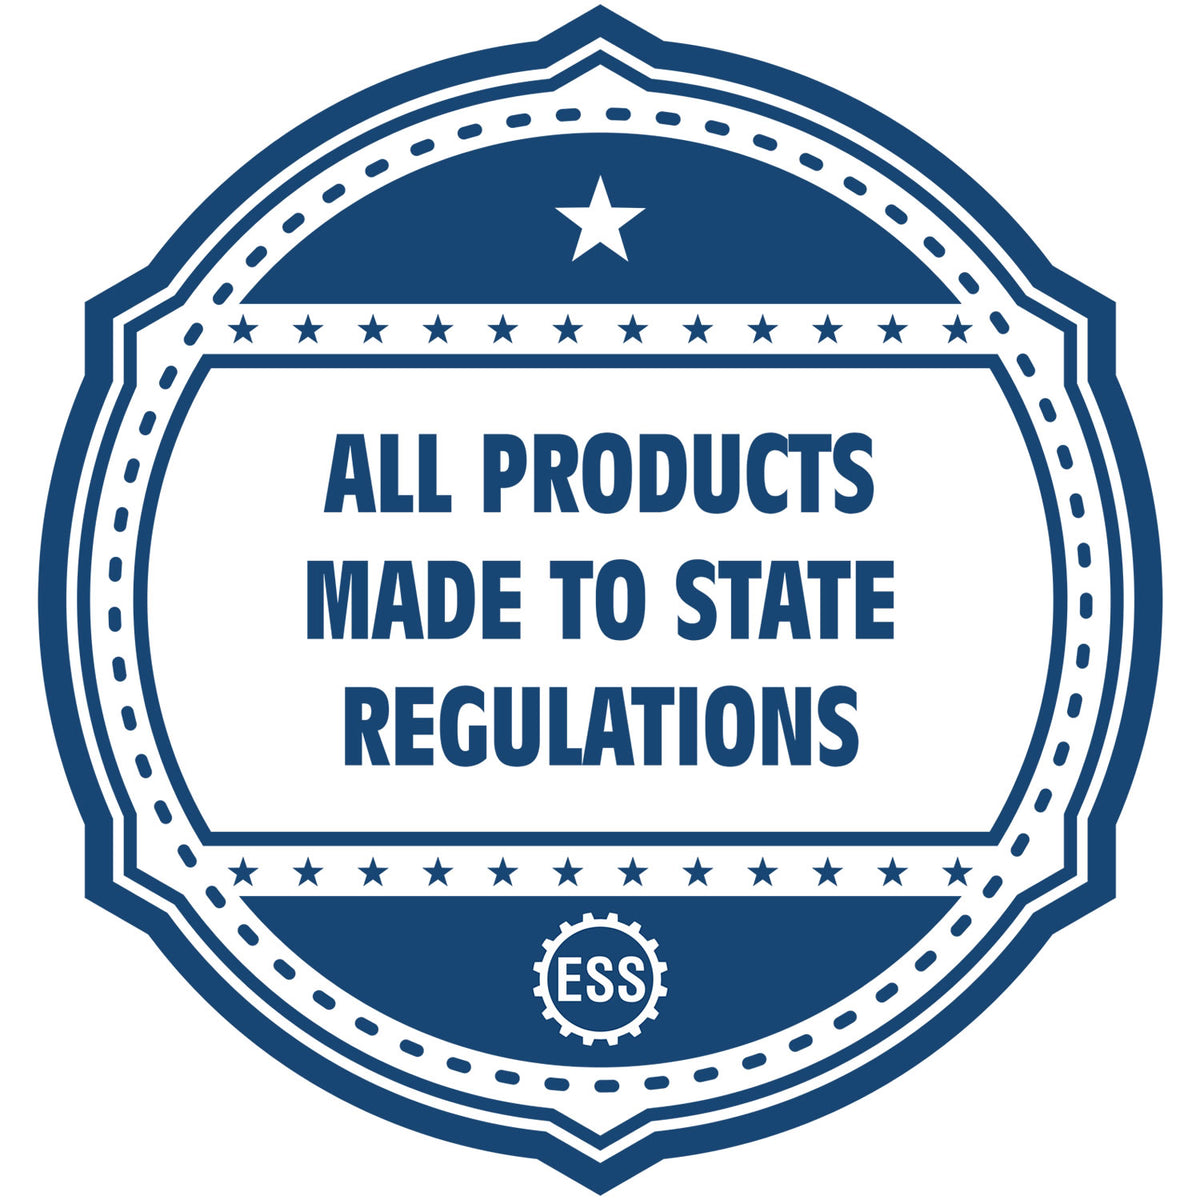 An icon or badge element for the Wooden Handle Illinois Rectangular Notary Public Stamp showing that this product is made in compliance with state regulations.